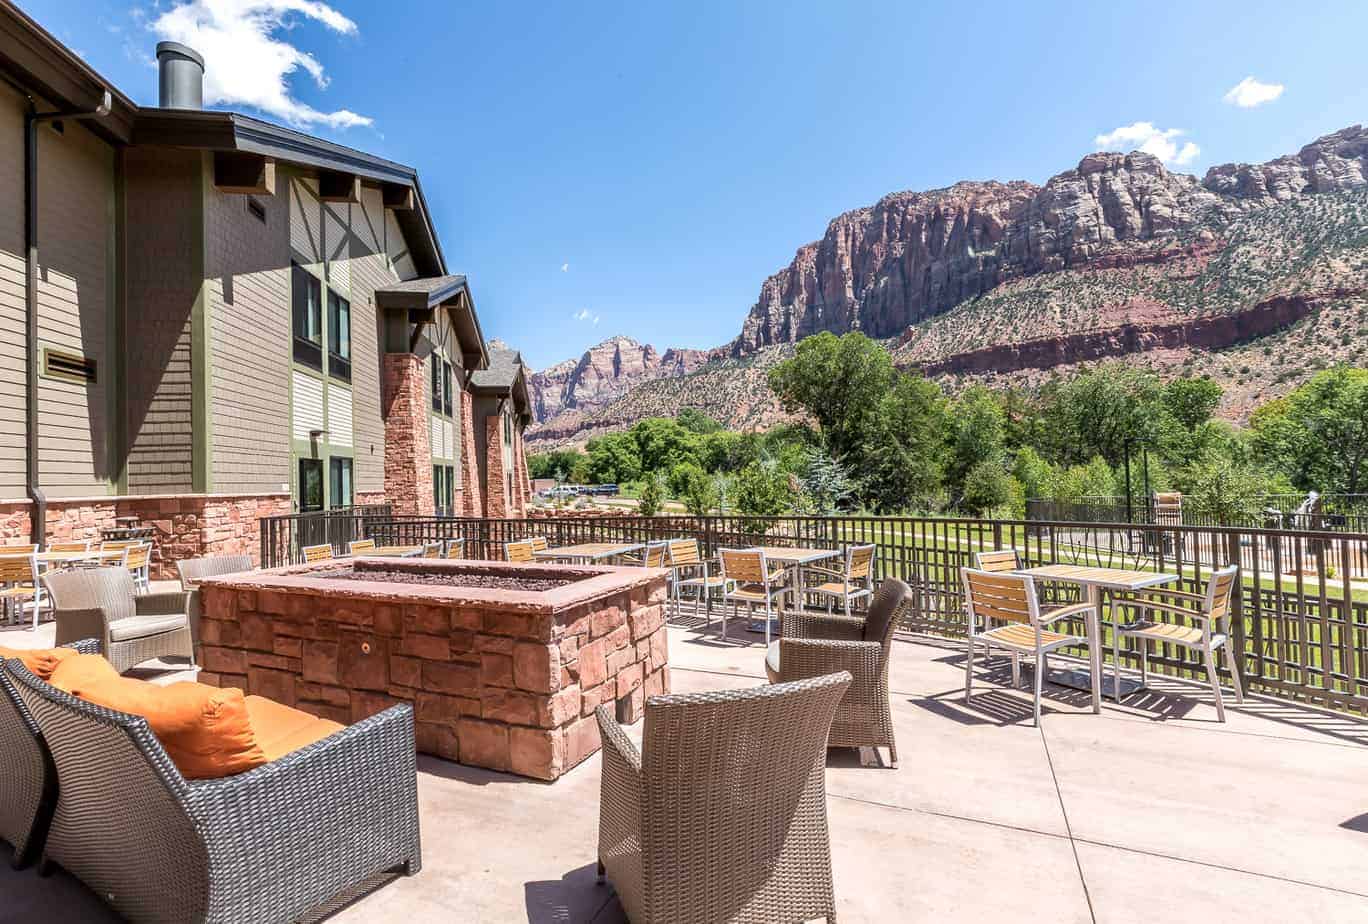 best place to stay for zion national park. SpringHIll Suite springdale review.